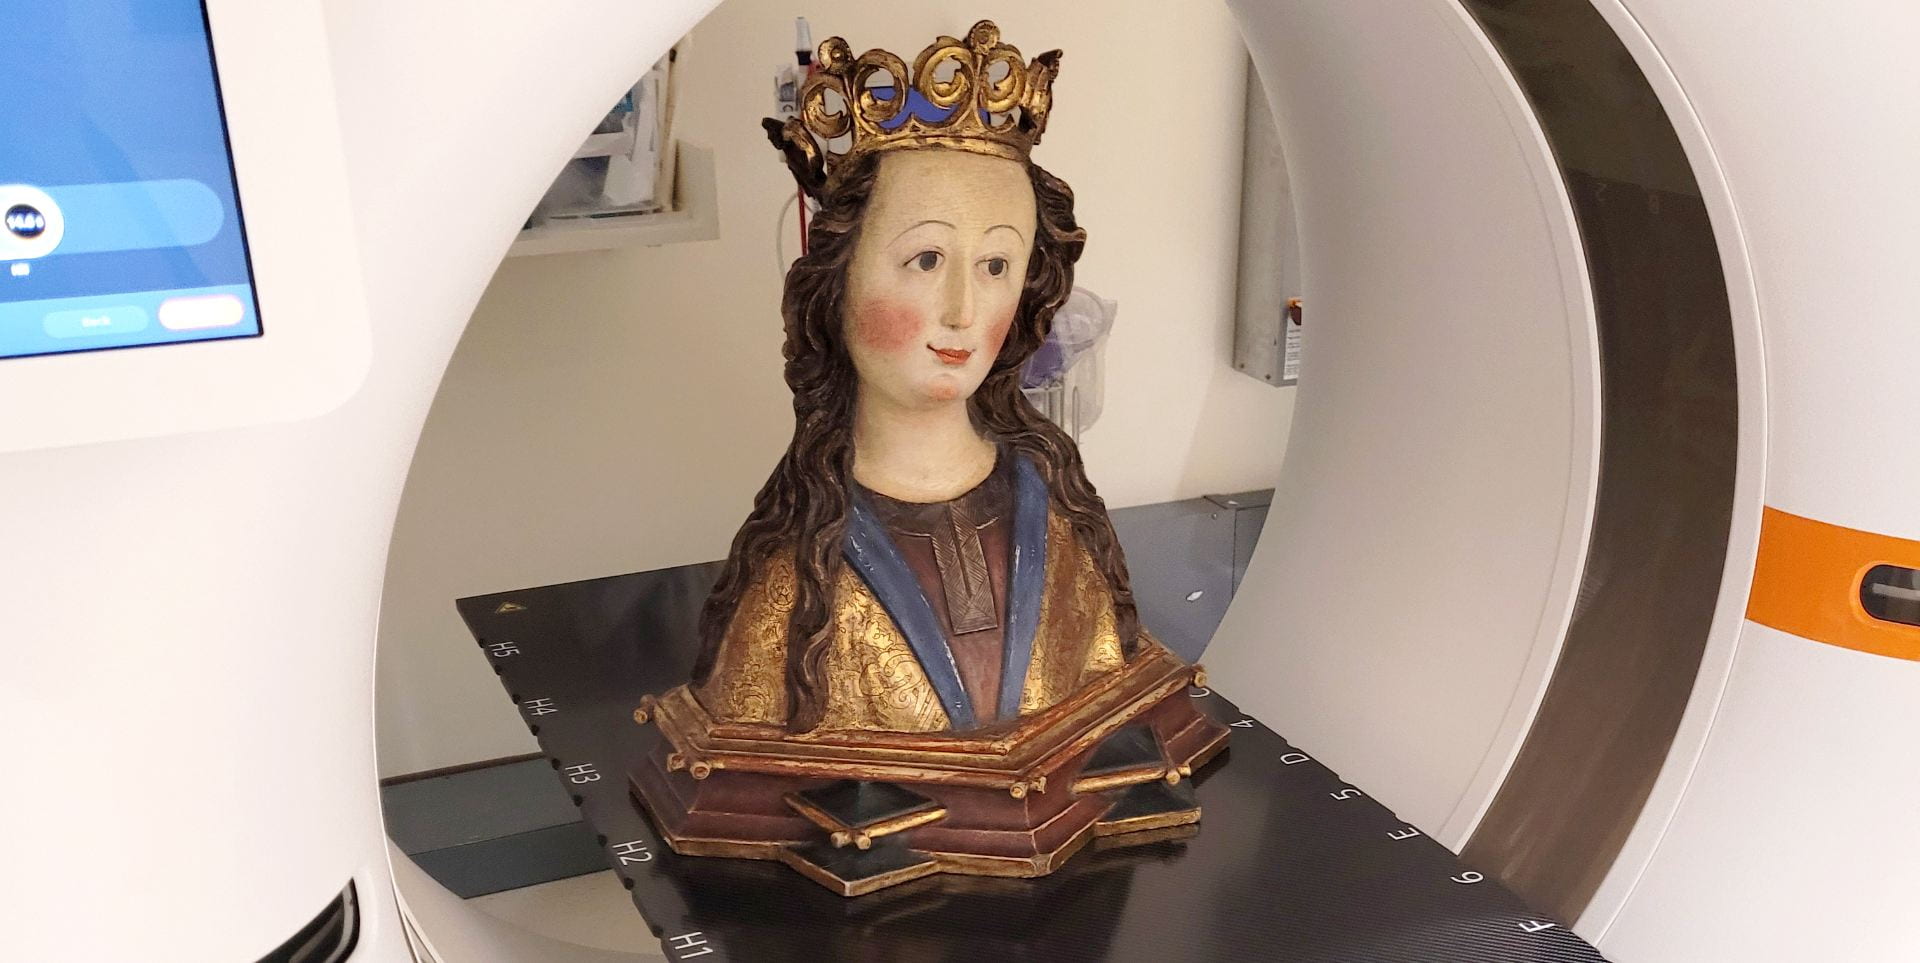 A religious relic in the form of a bust of a woman wearing a crown inside a CT scanner.